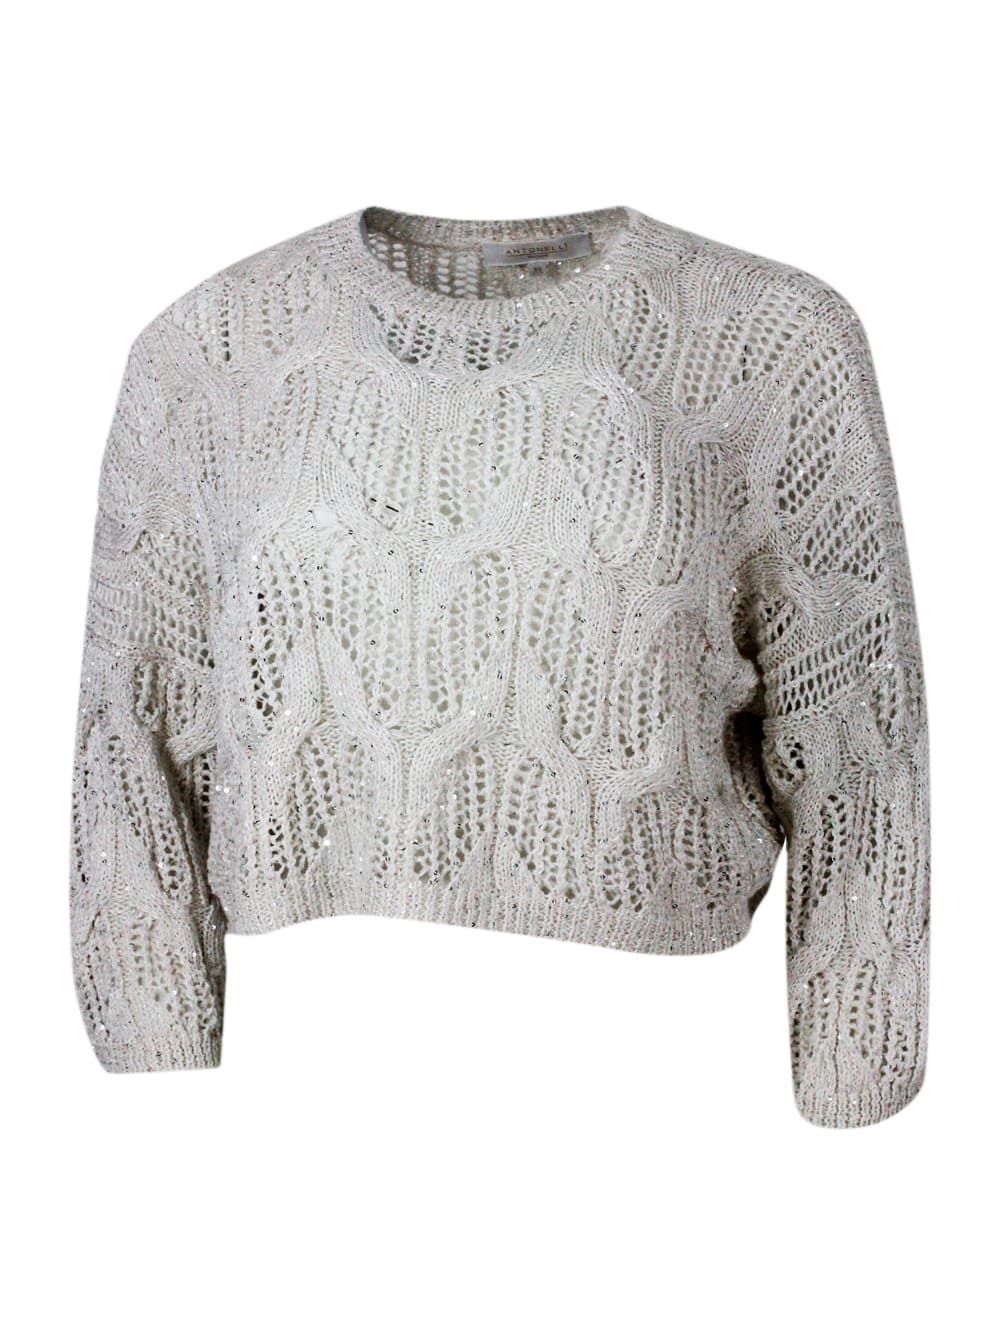 Long-sleeved Crew-neck Sweater With Braided Workmanship Embellished With Cotton And Linen Microsequins